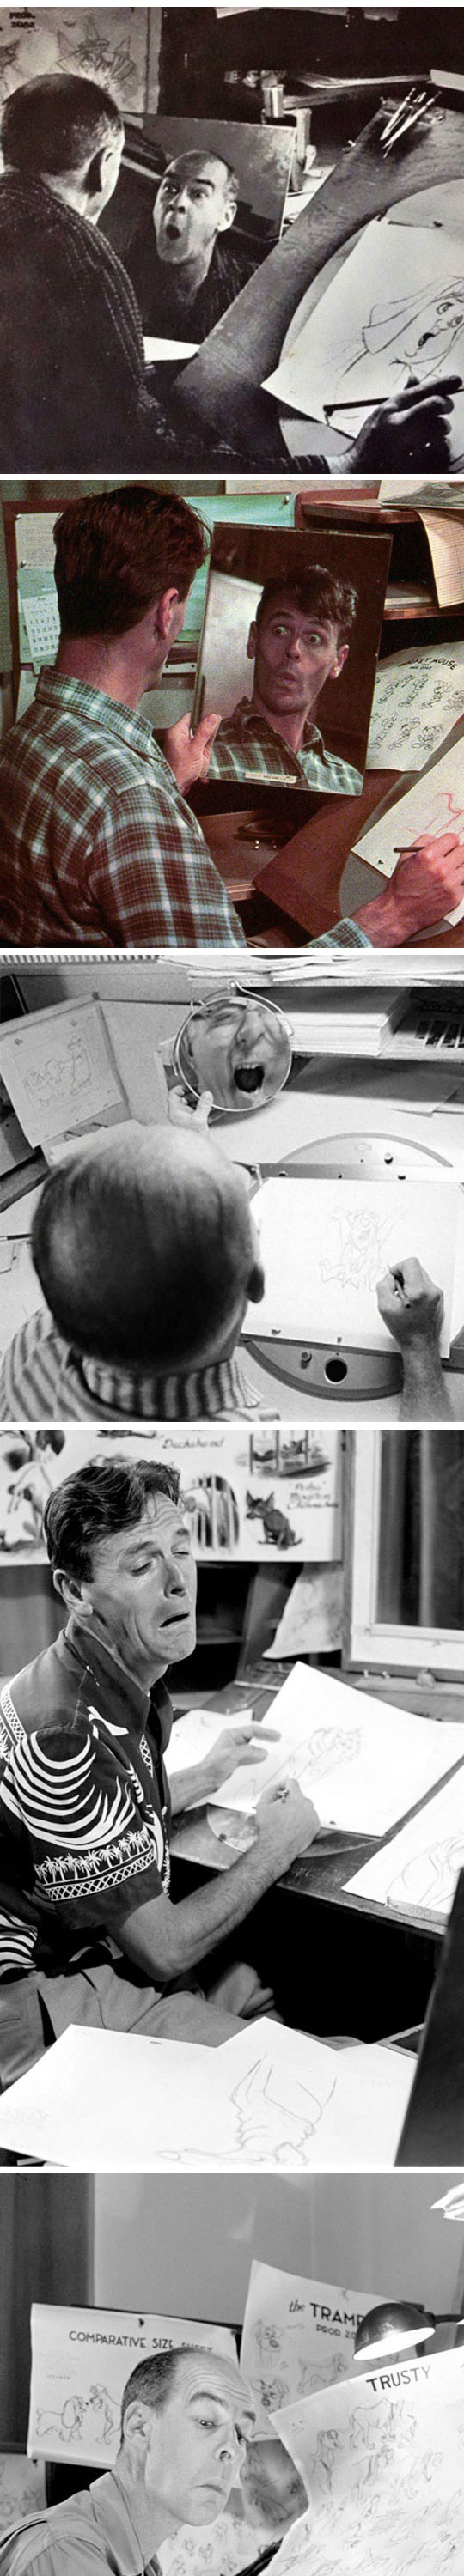 funny-animator-face-mirror-drawing